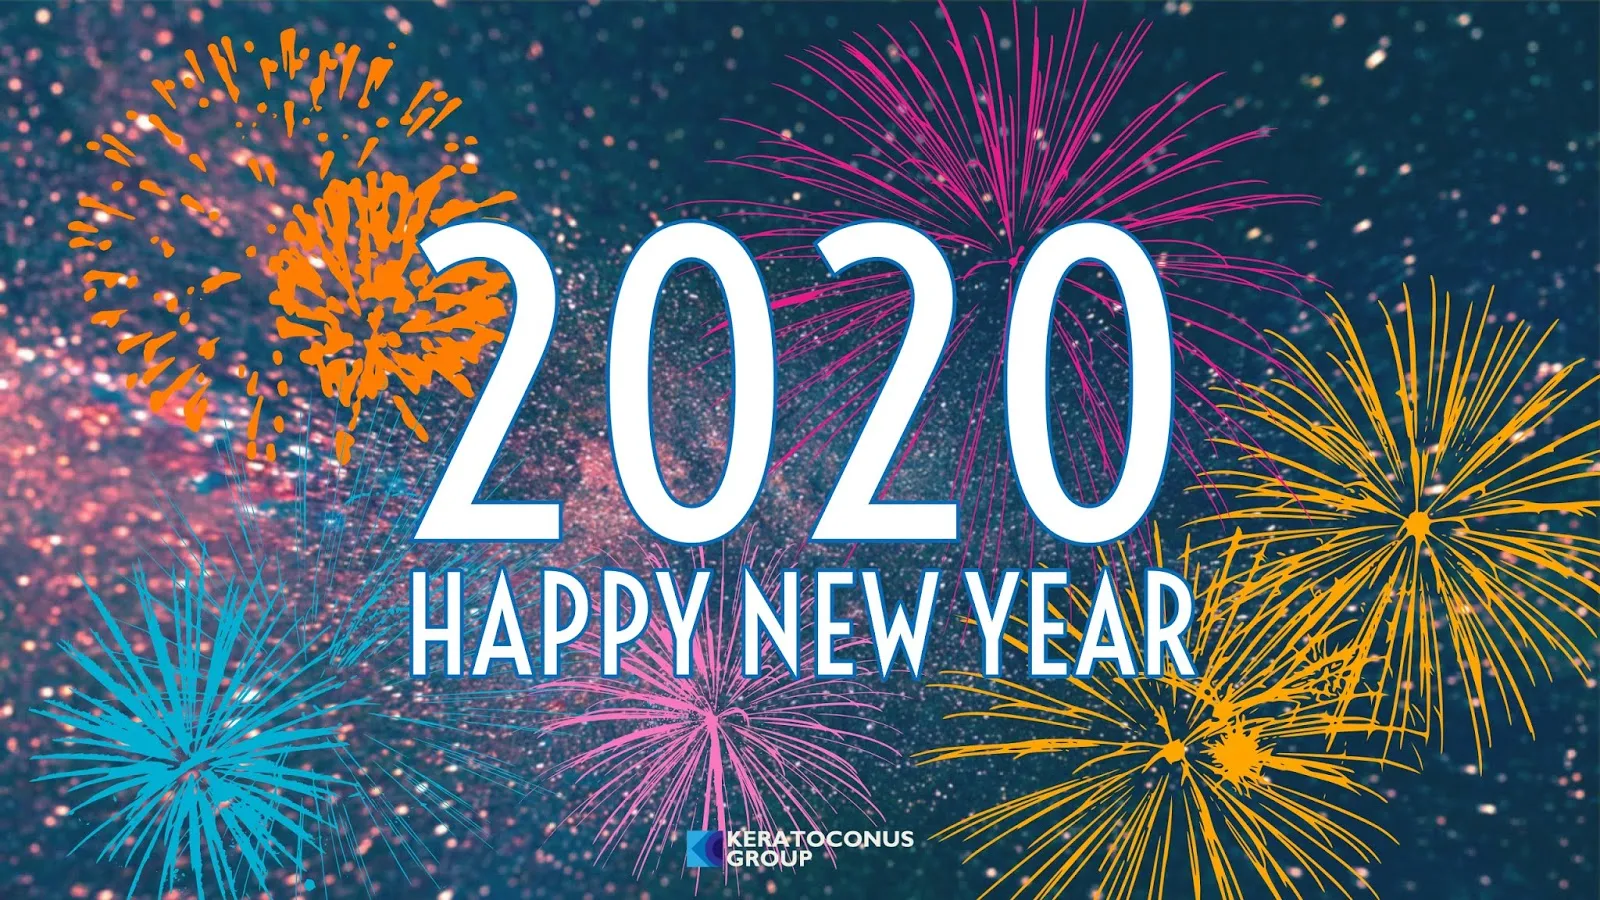 From all of us here at the Keratoconus Group, we wish you a very happy, healthy, and prosperous New Year.